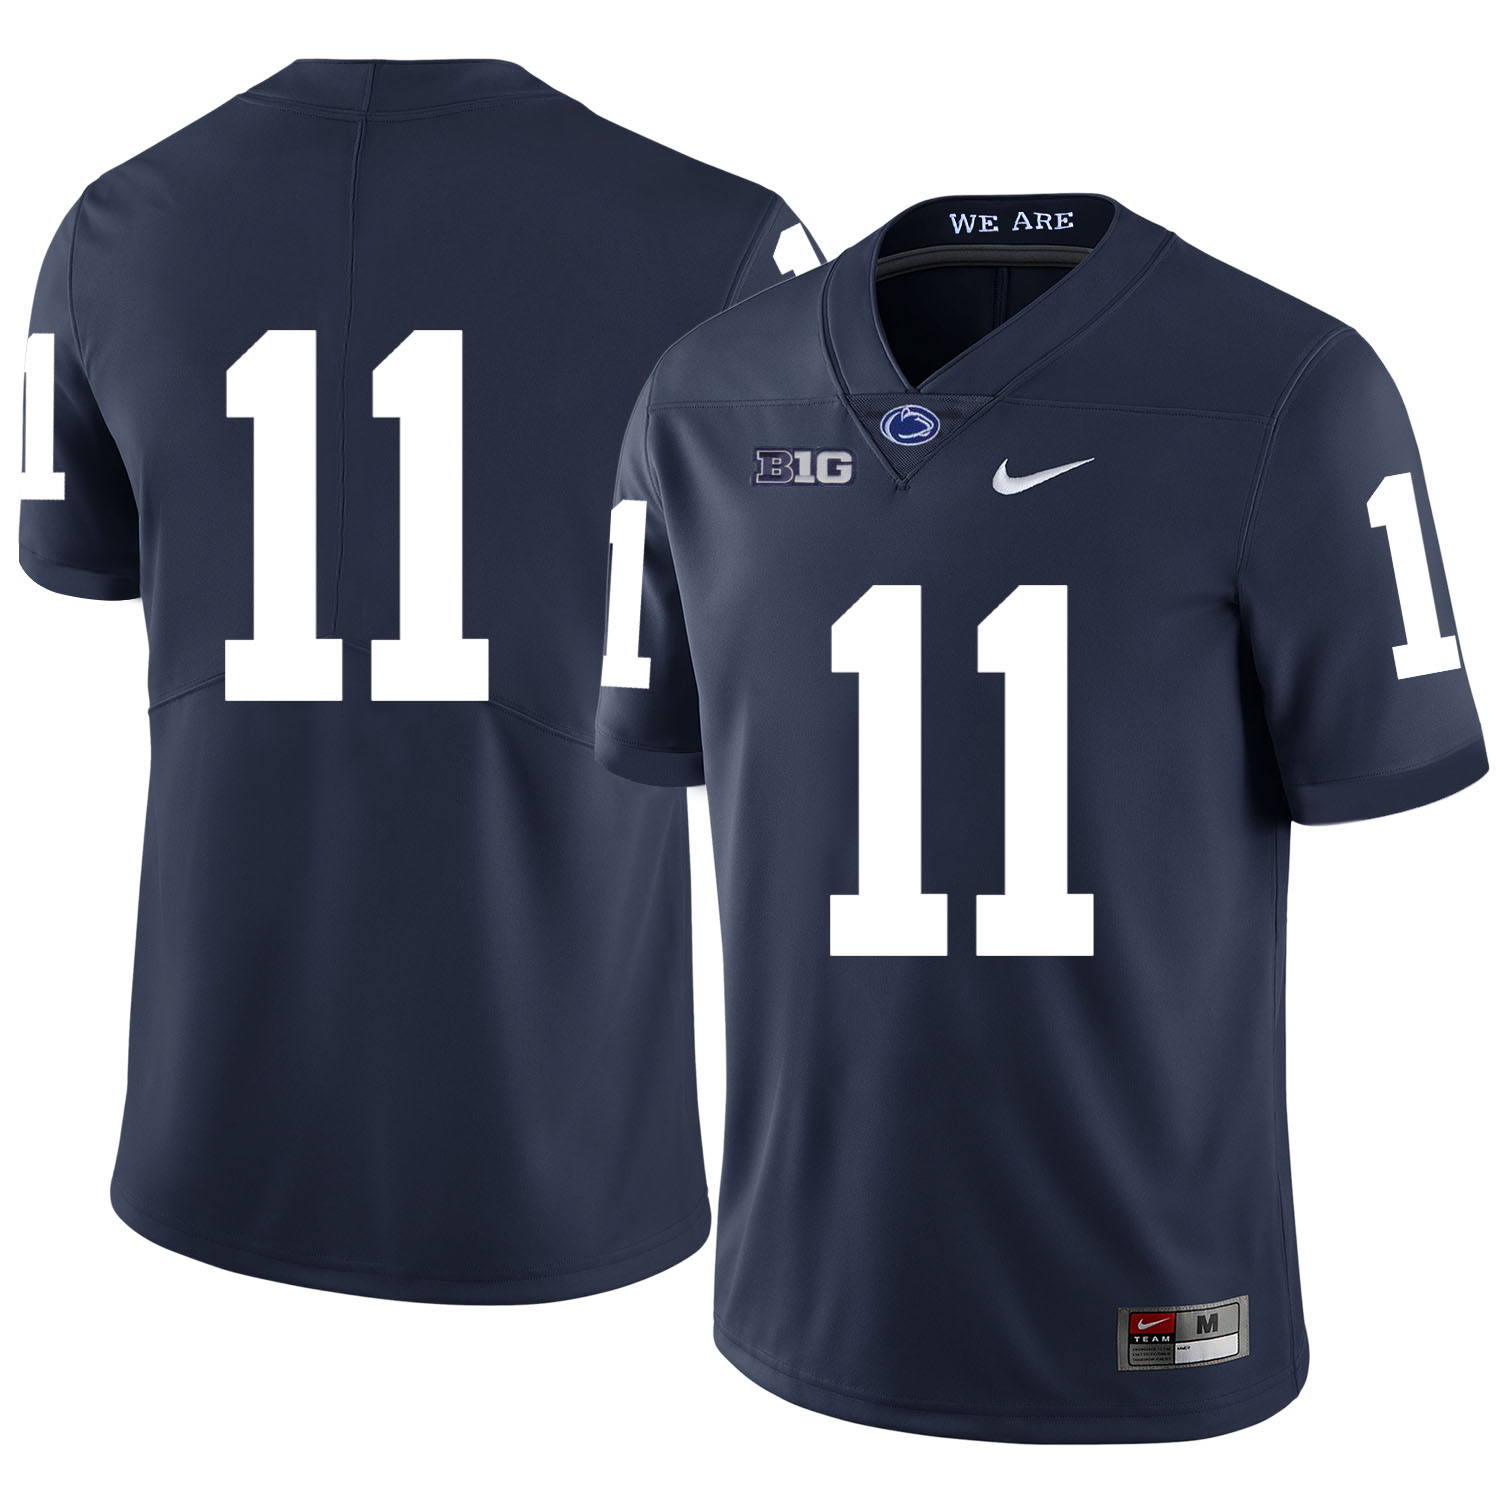 Penn State Nittany Lions 11 Brandon Bell Navy Nike College Football Jersey